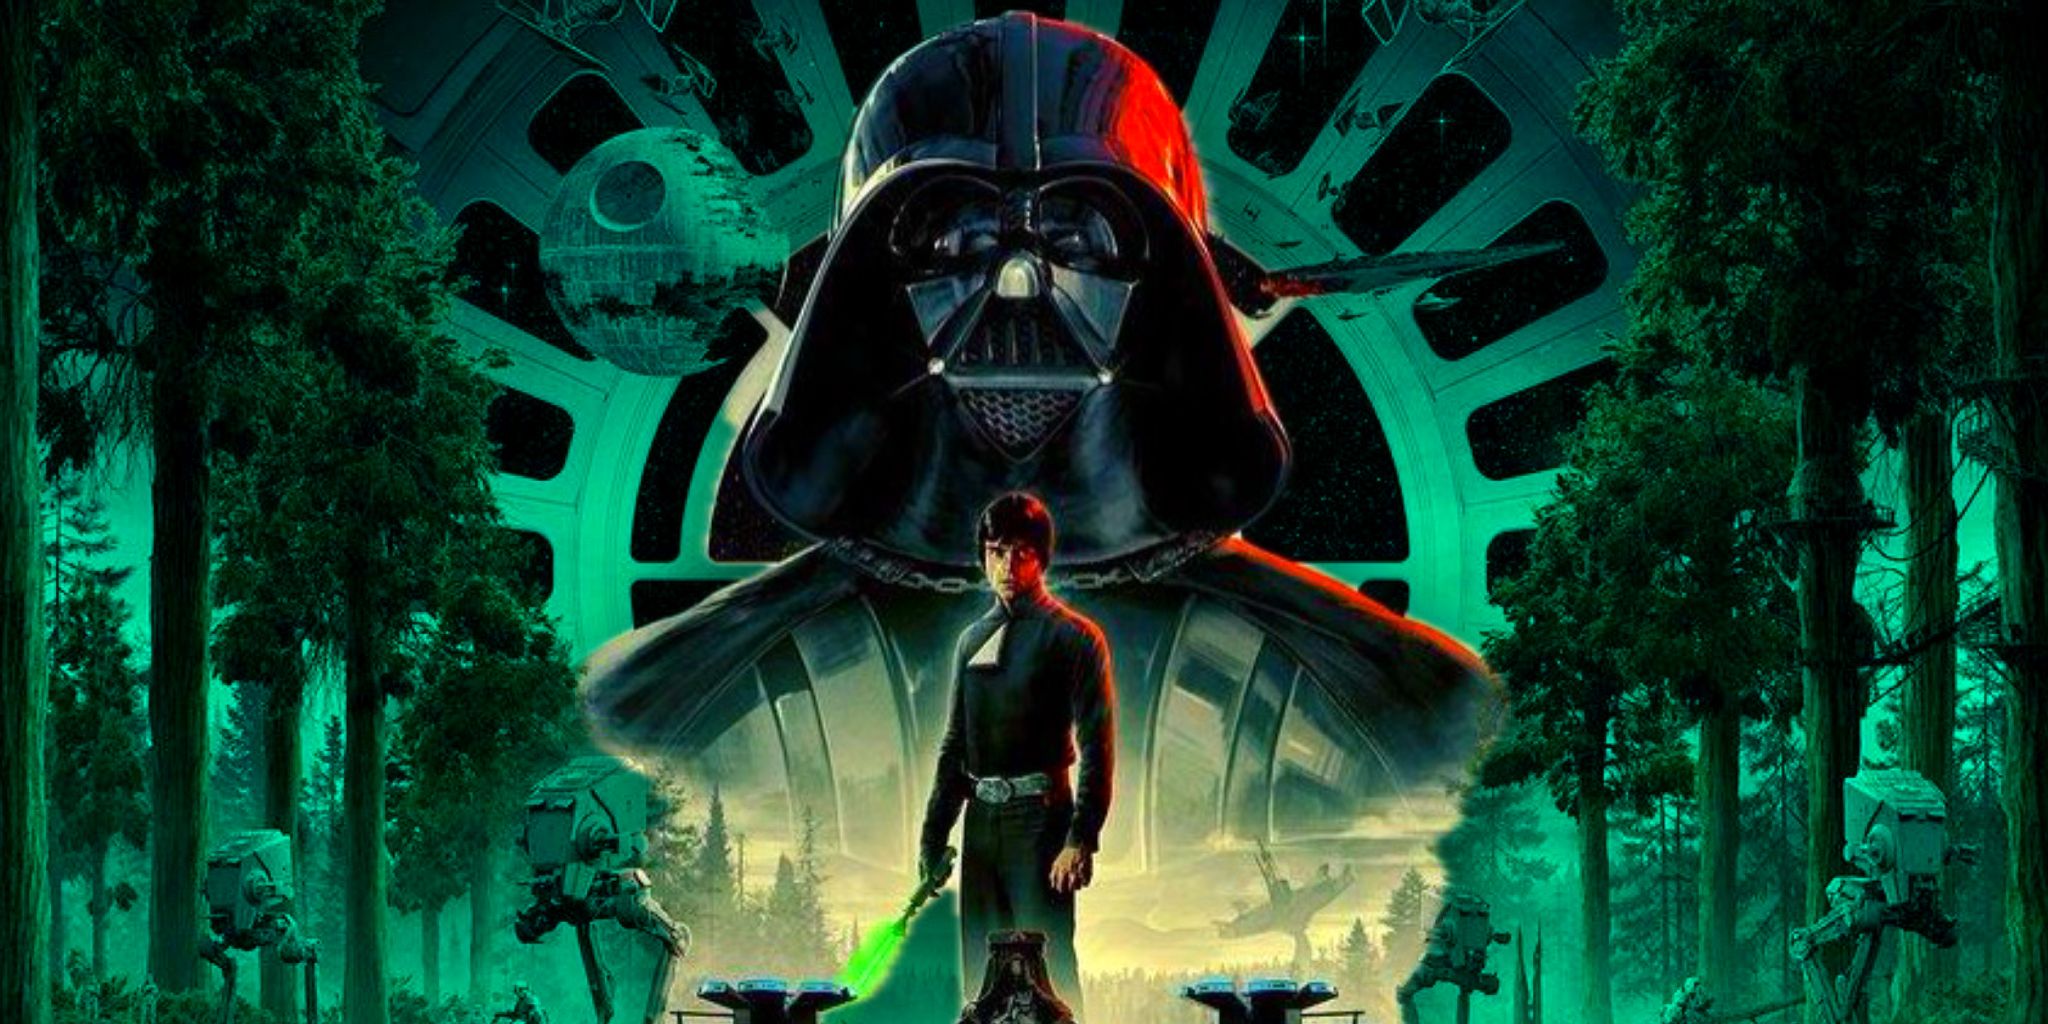 Darth Vader and Luke Skywalker in Star Wars' Return of the Jedi 40th anniversary poster